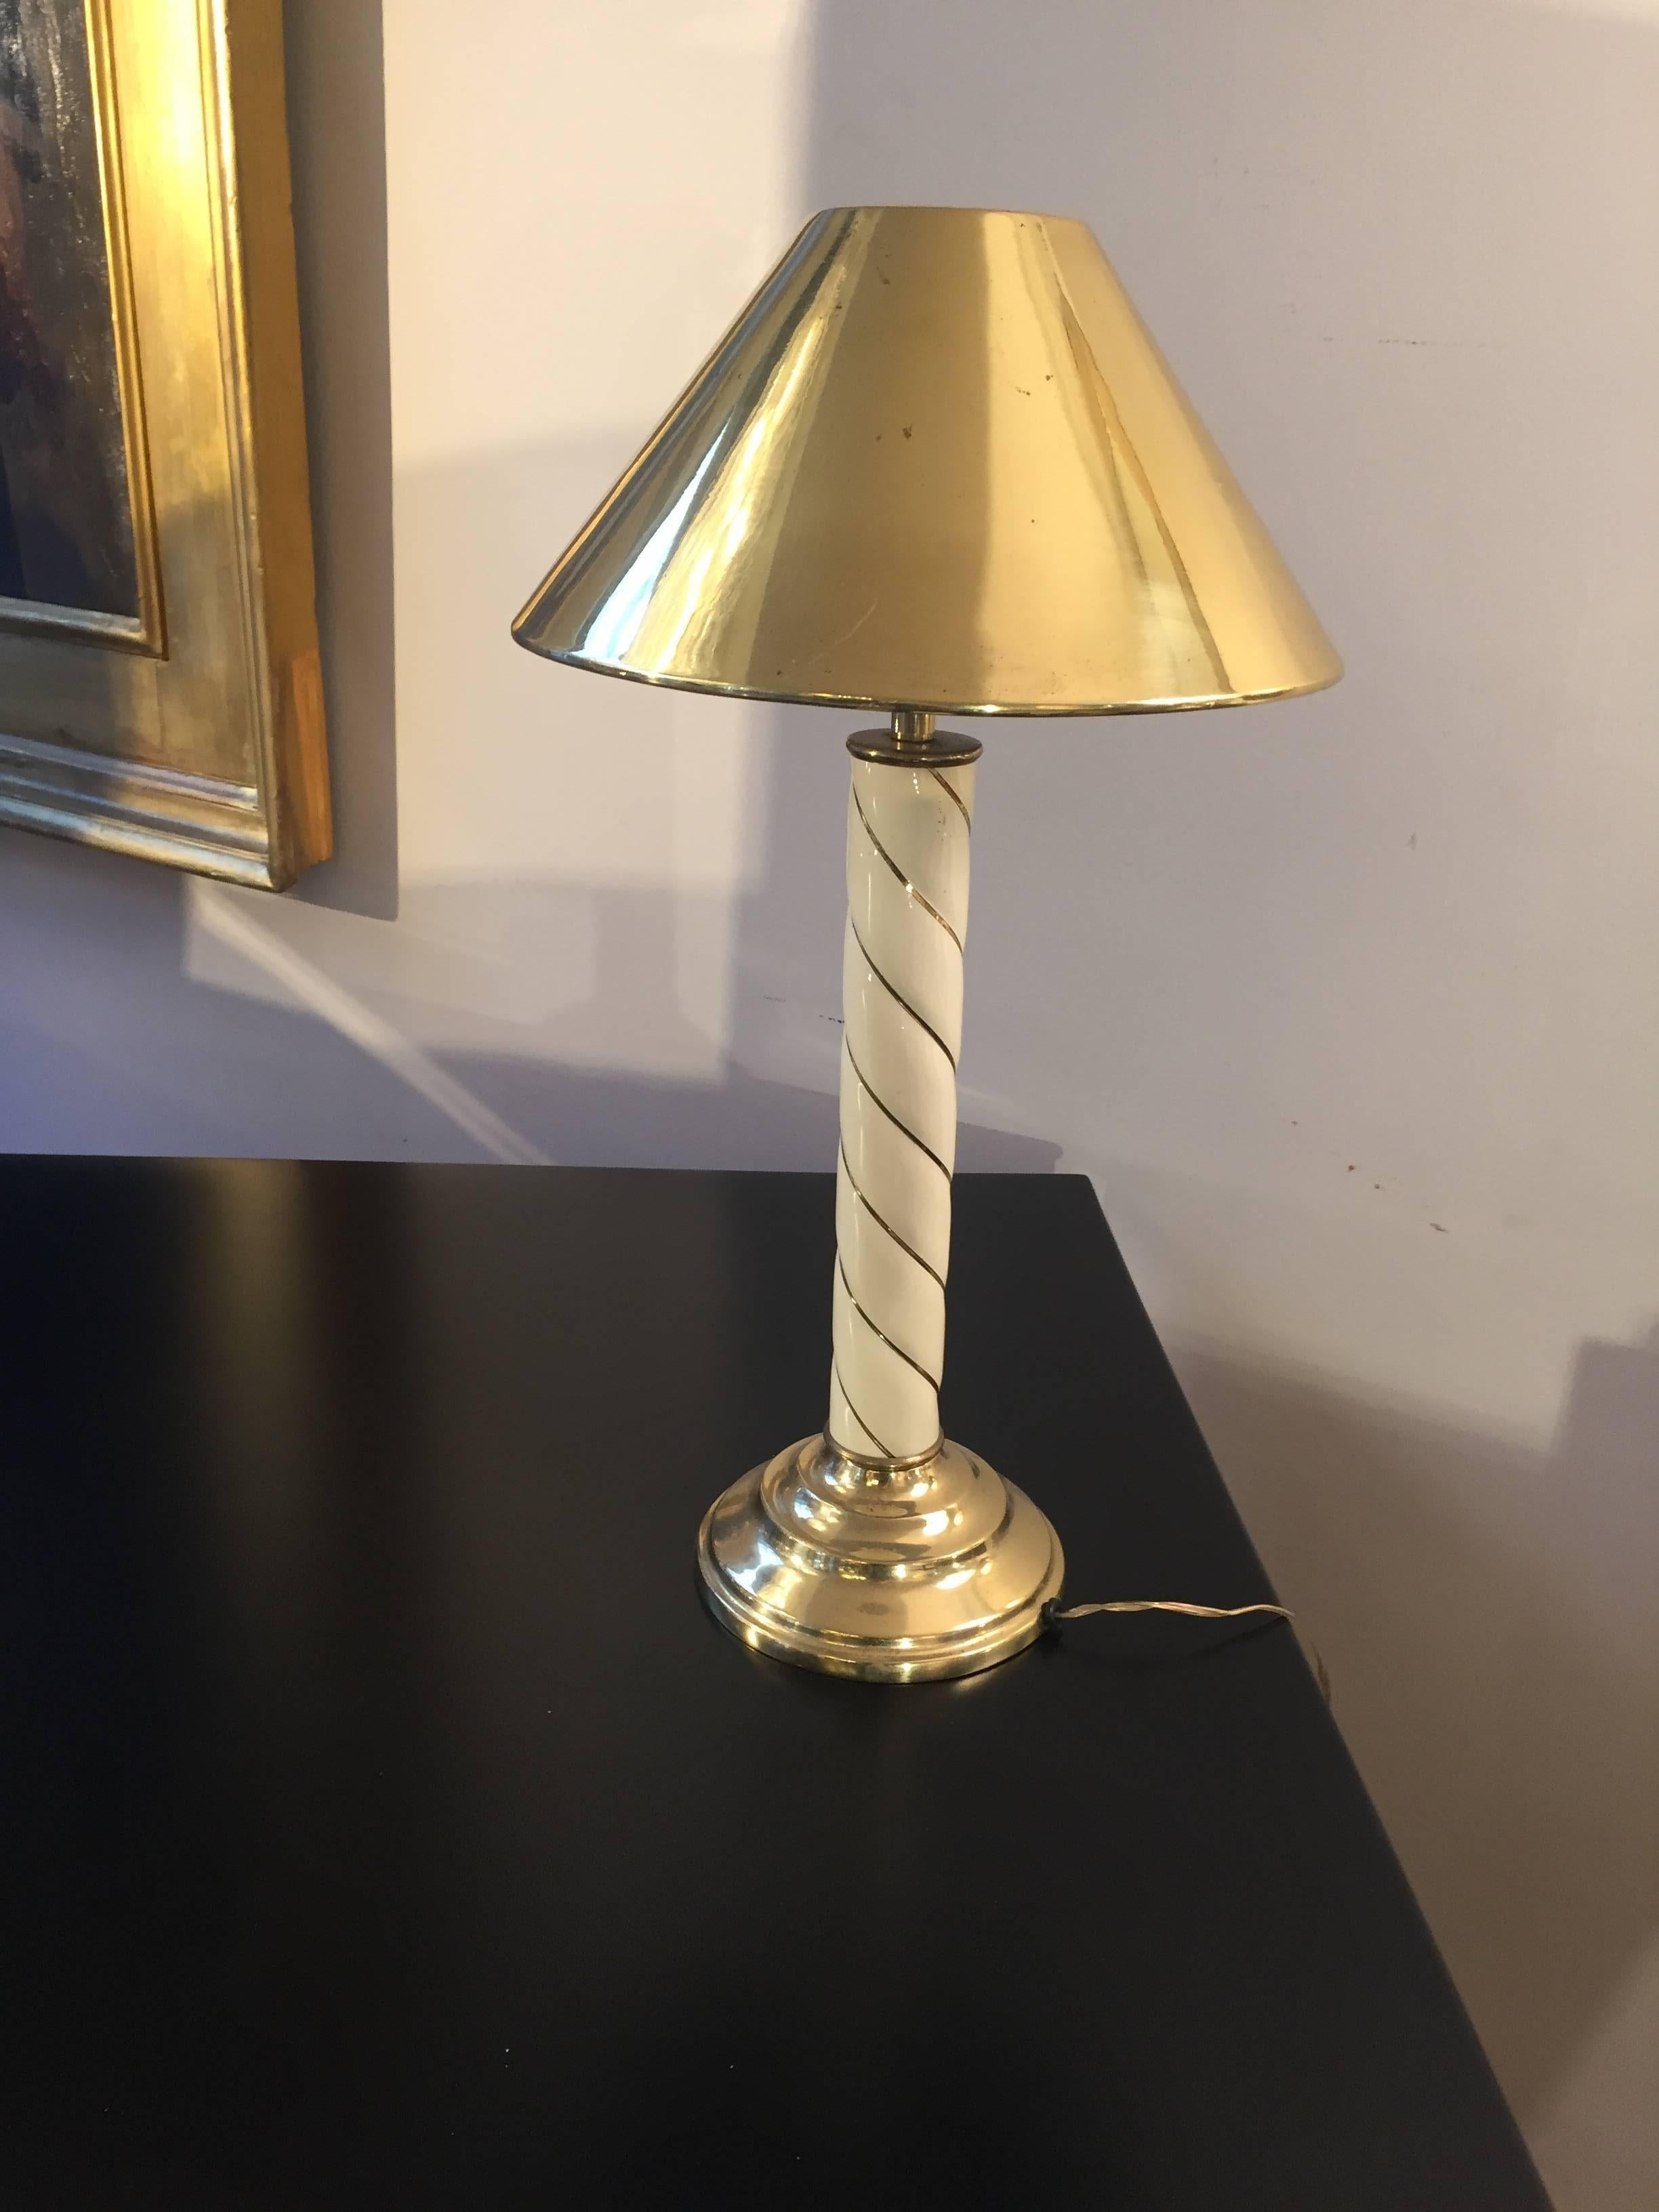 Small dimensions lamps with original brass lampshades. From Italy from 1970s attributed to Tommaso Barbi. The trunk is ivory-color resin and gold details. These small lamps (lampshade diameter 25 cm) are perfect for small spaces such as bedside